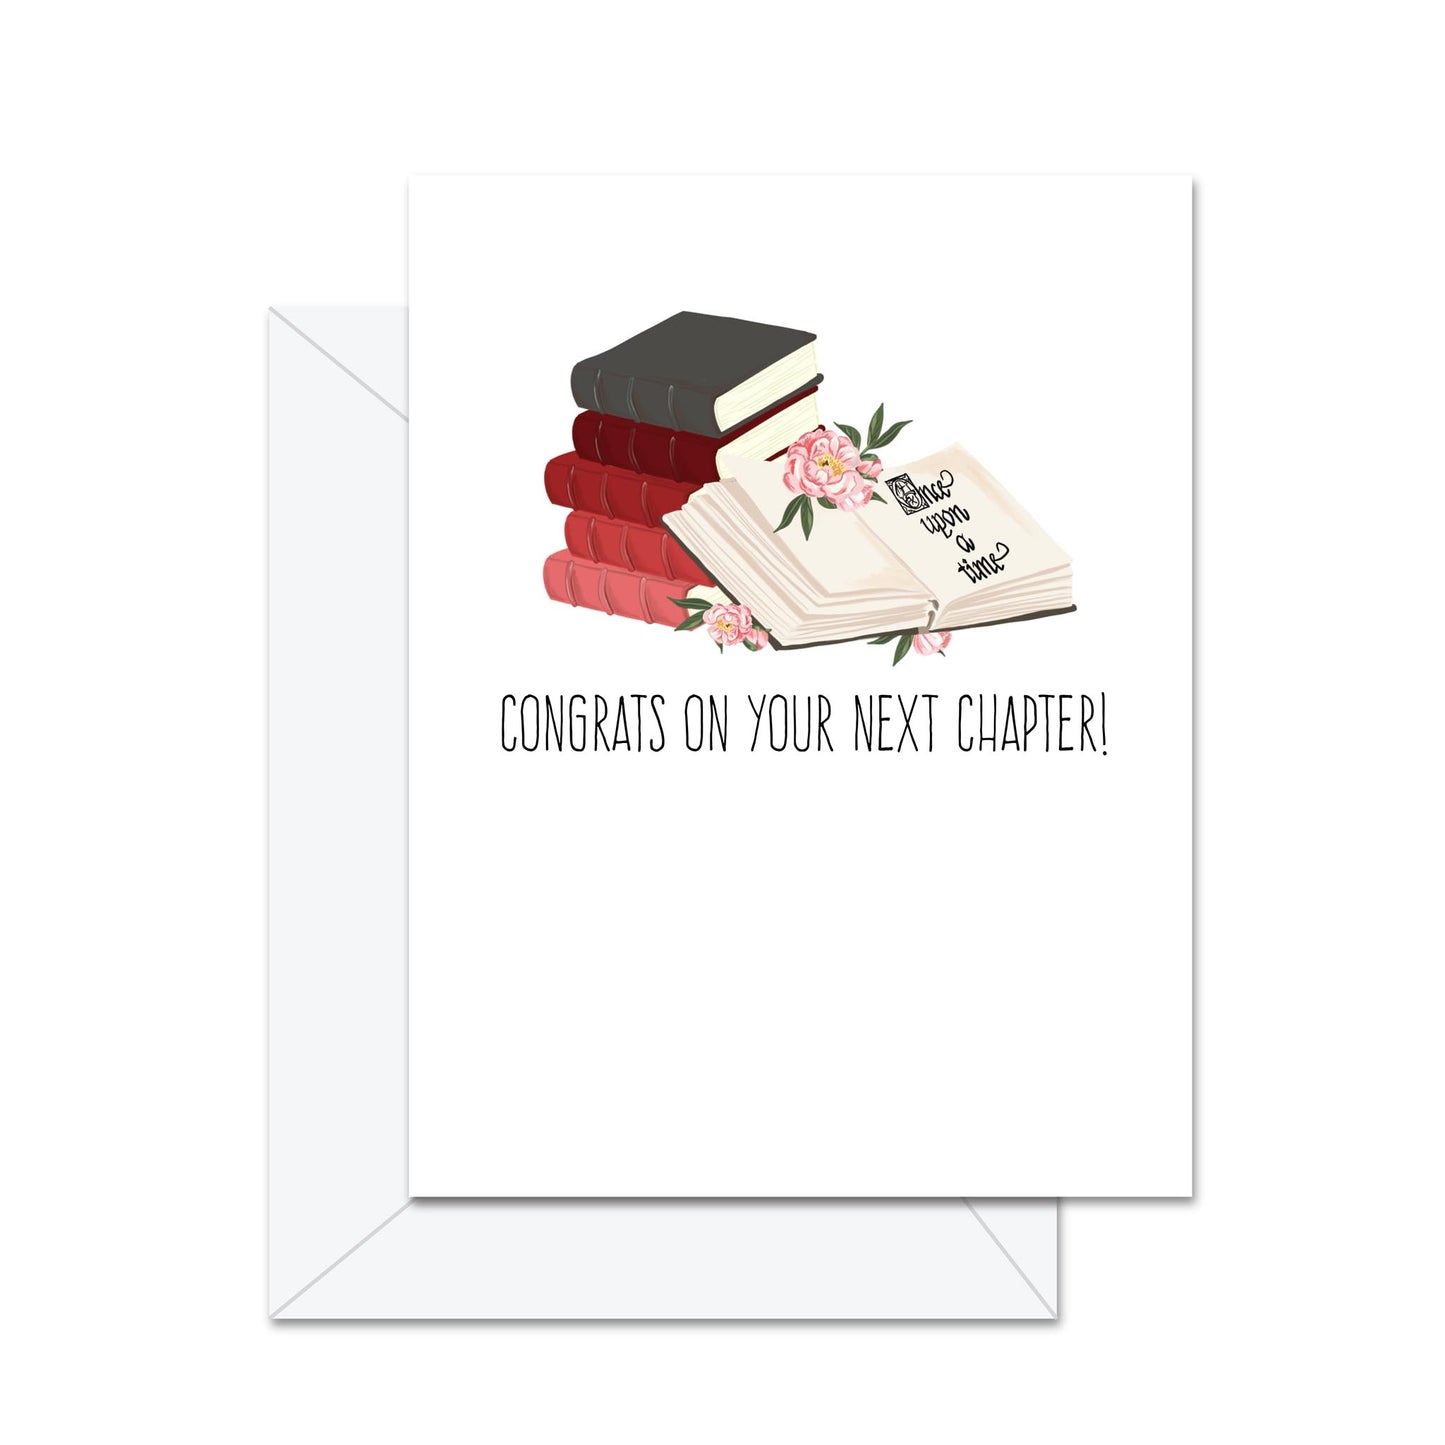 Congrats On Your Next Chapter! - Greeting Card